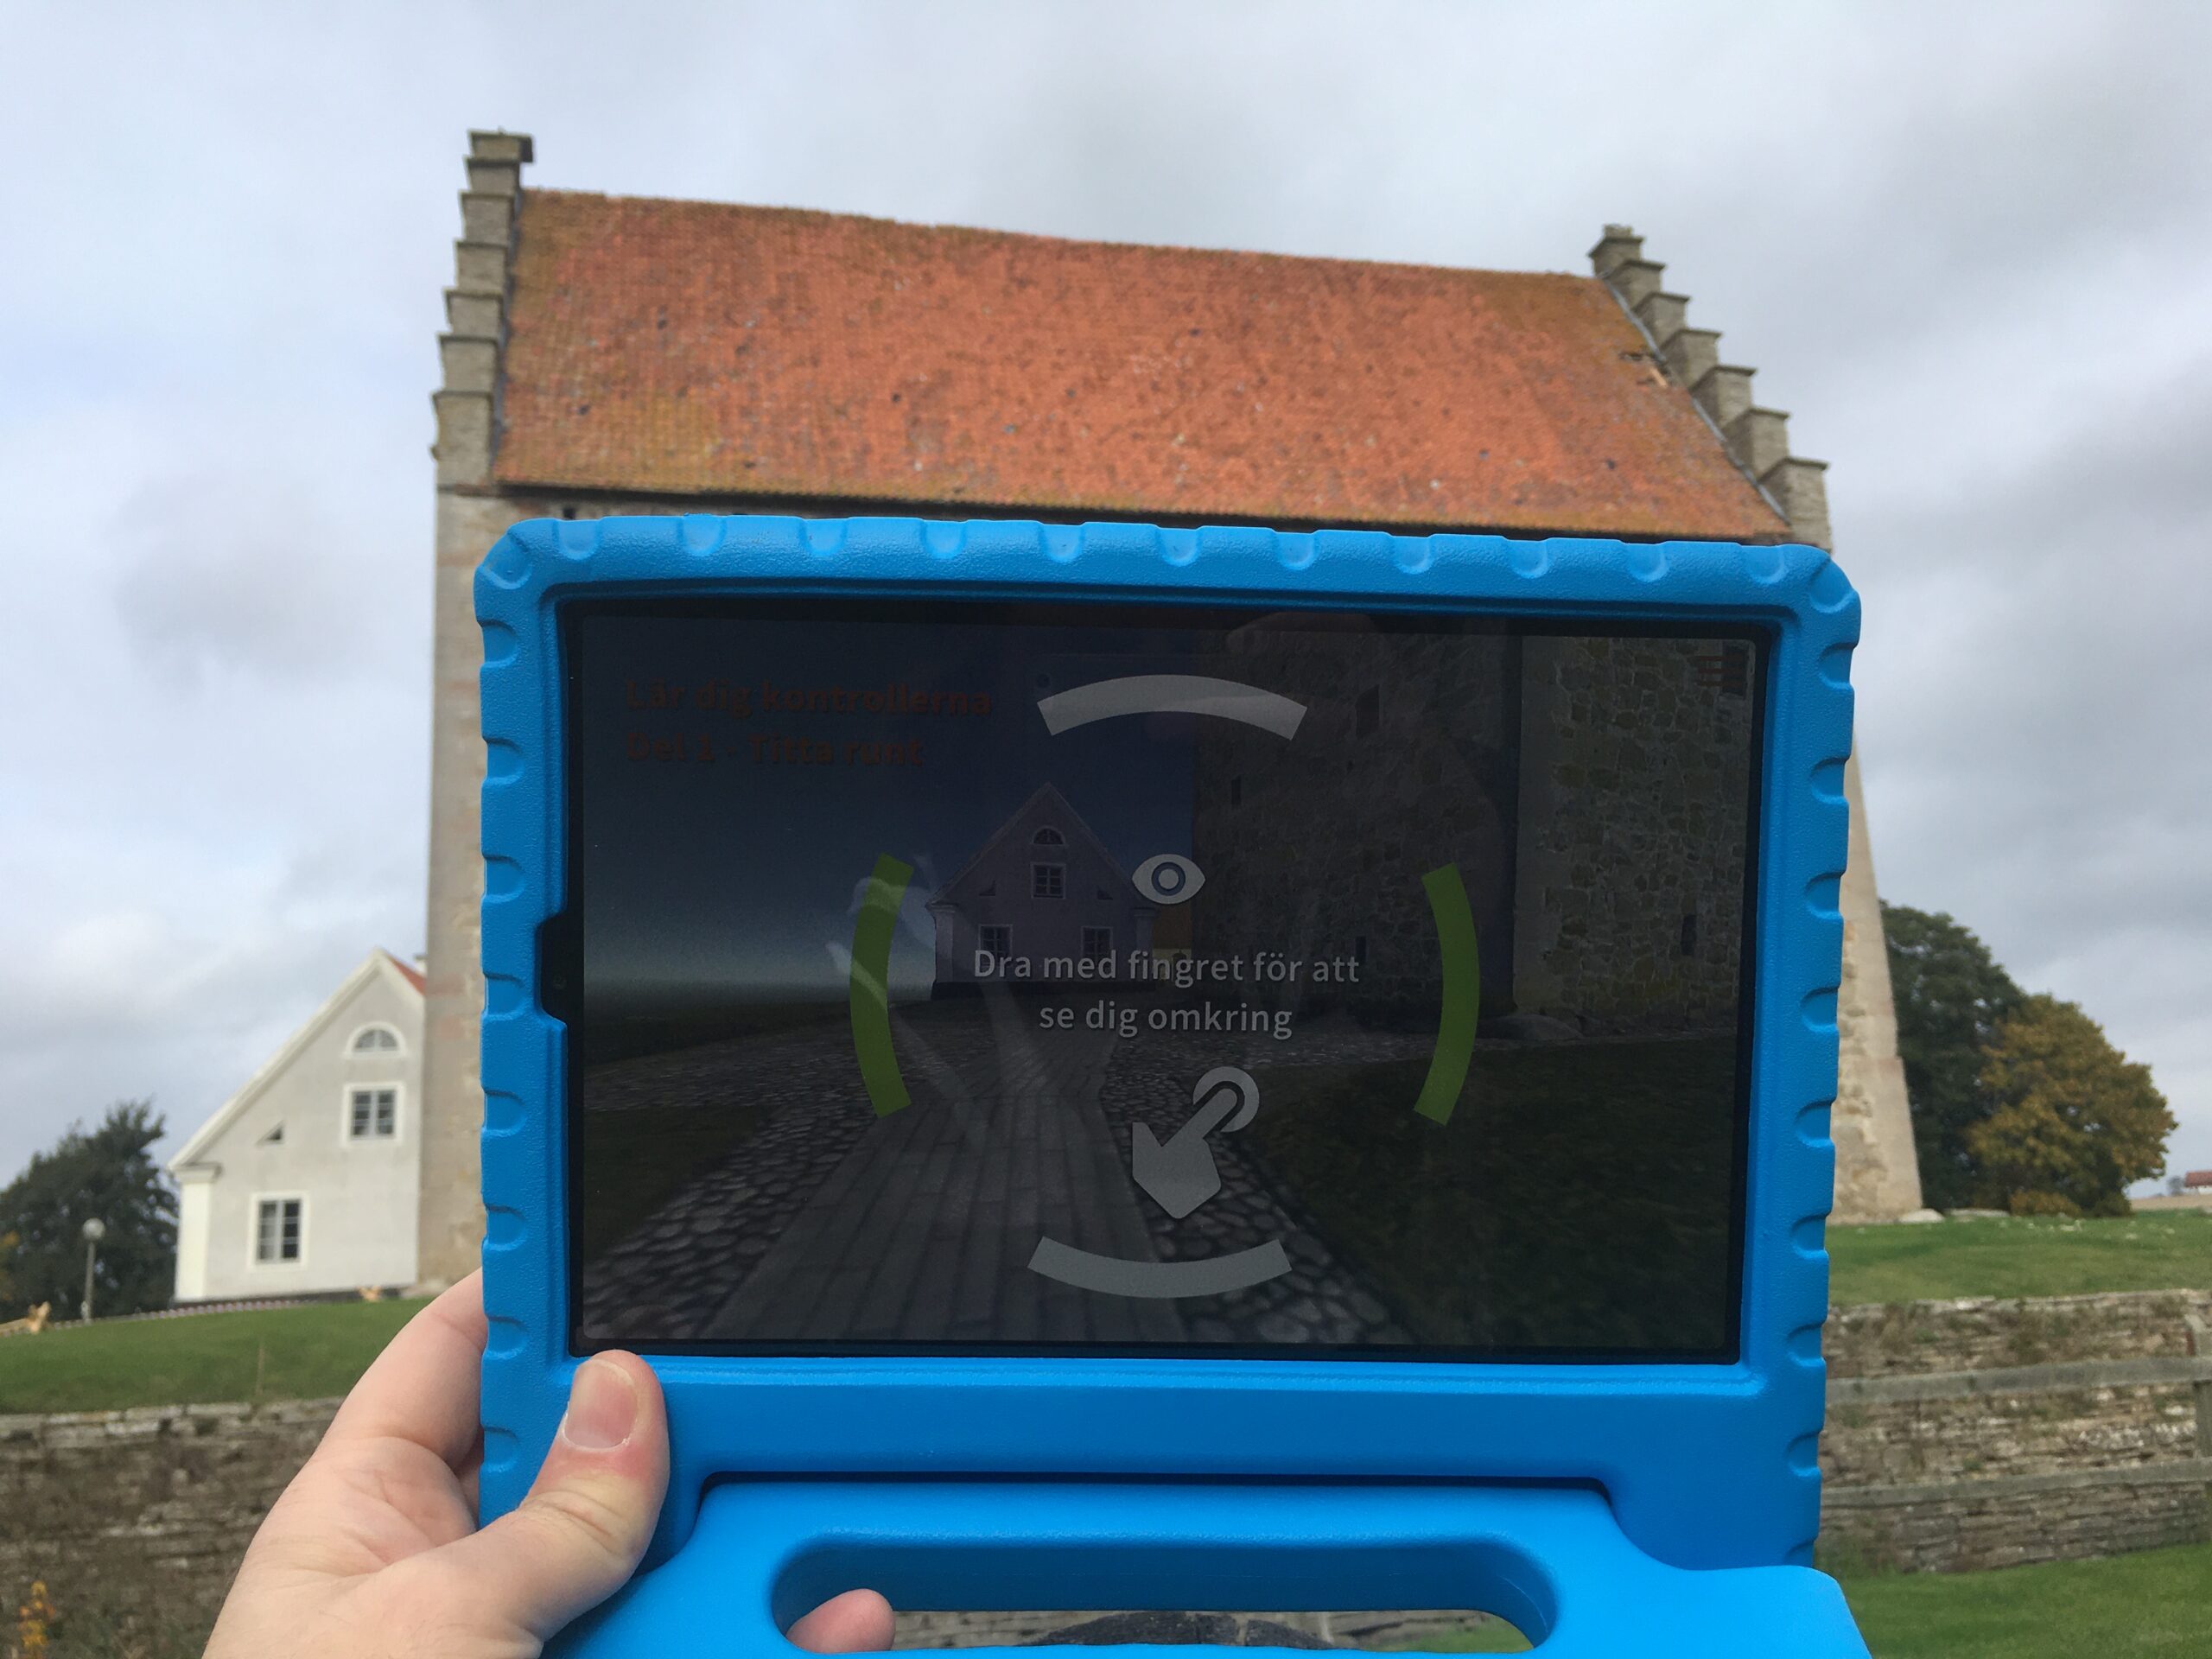 A tablet with the digital guide on the screen is held up outside in front of the castle so that the screen covers the entire building except the roof.